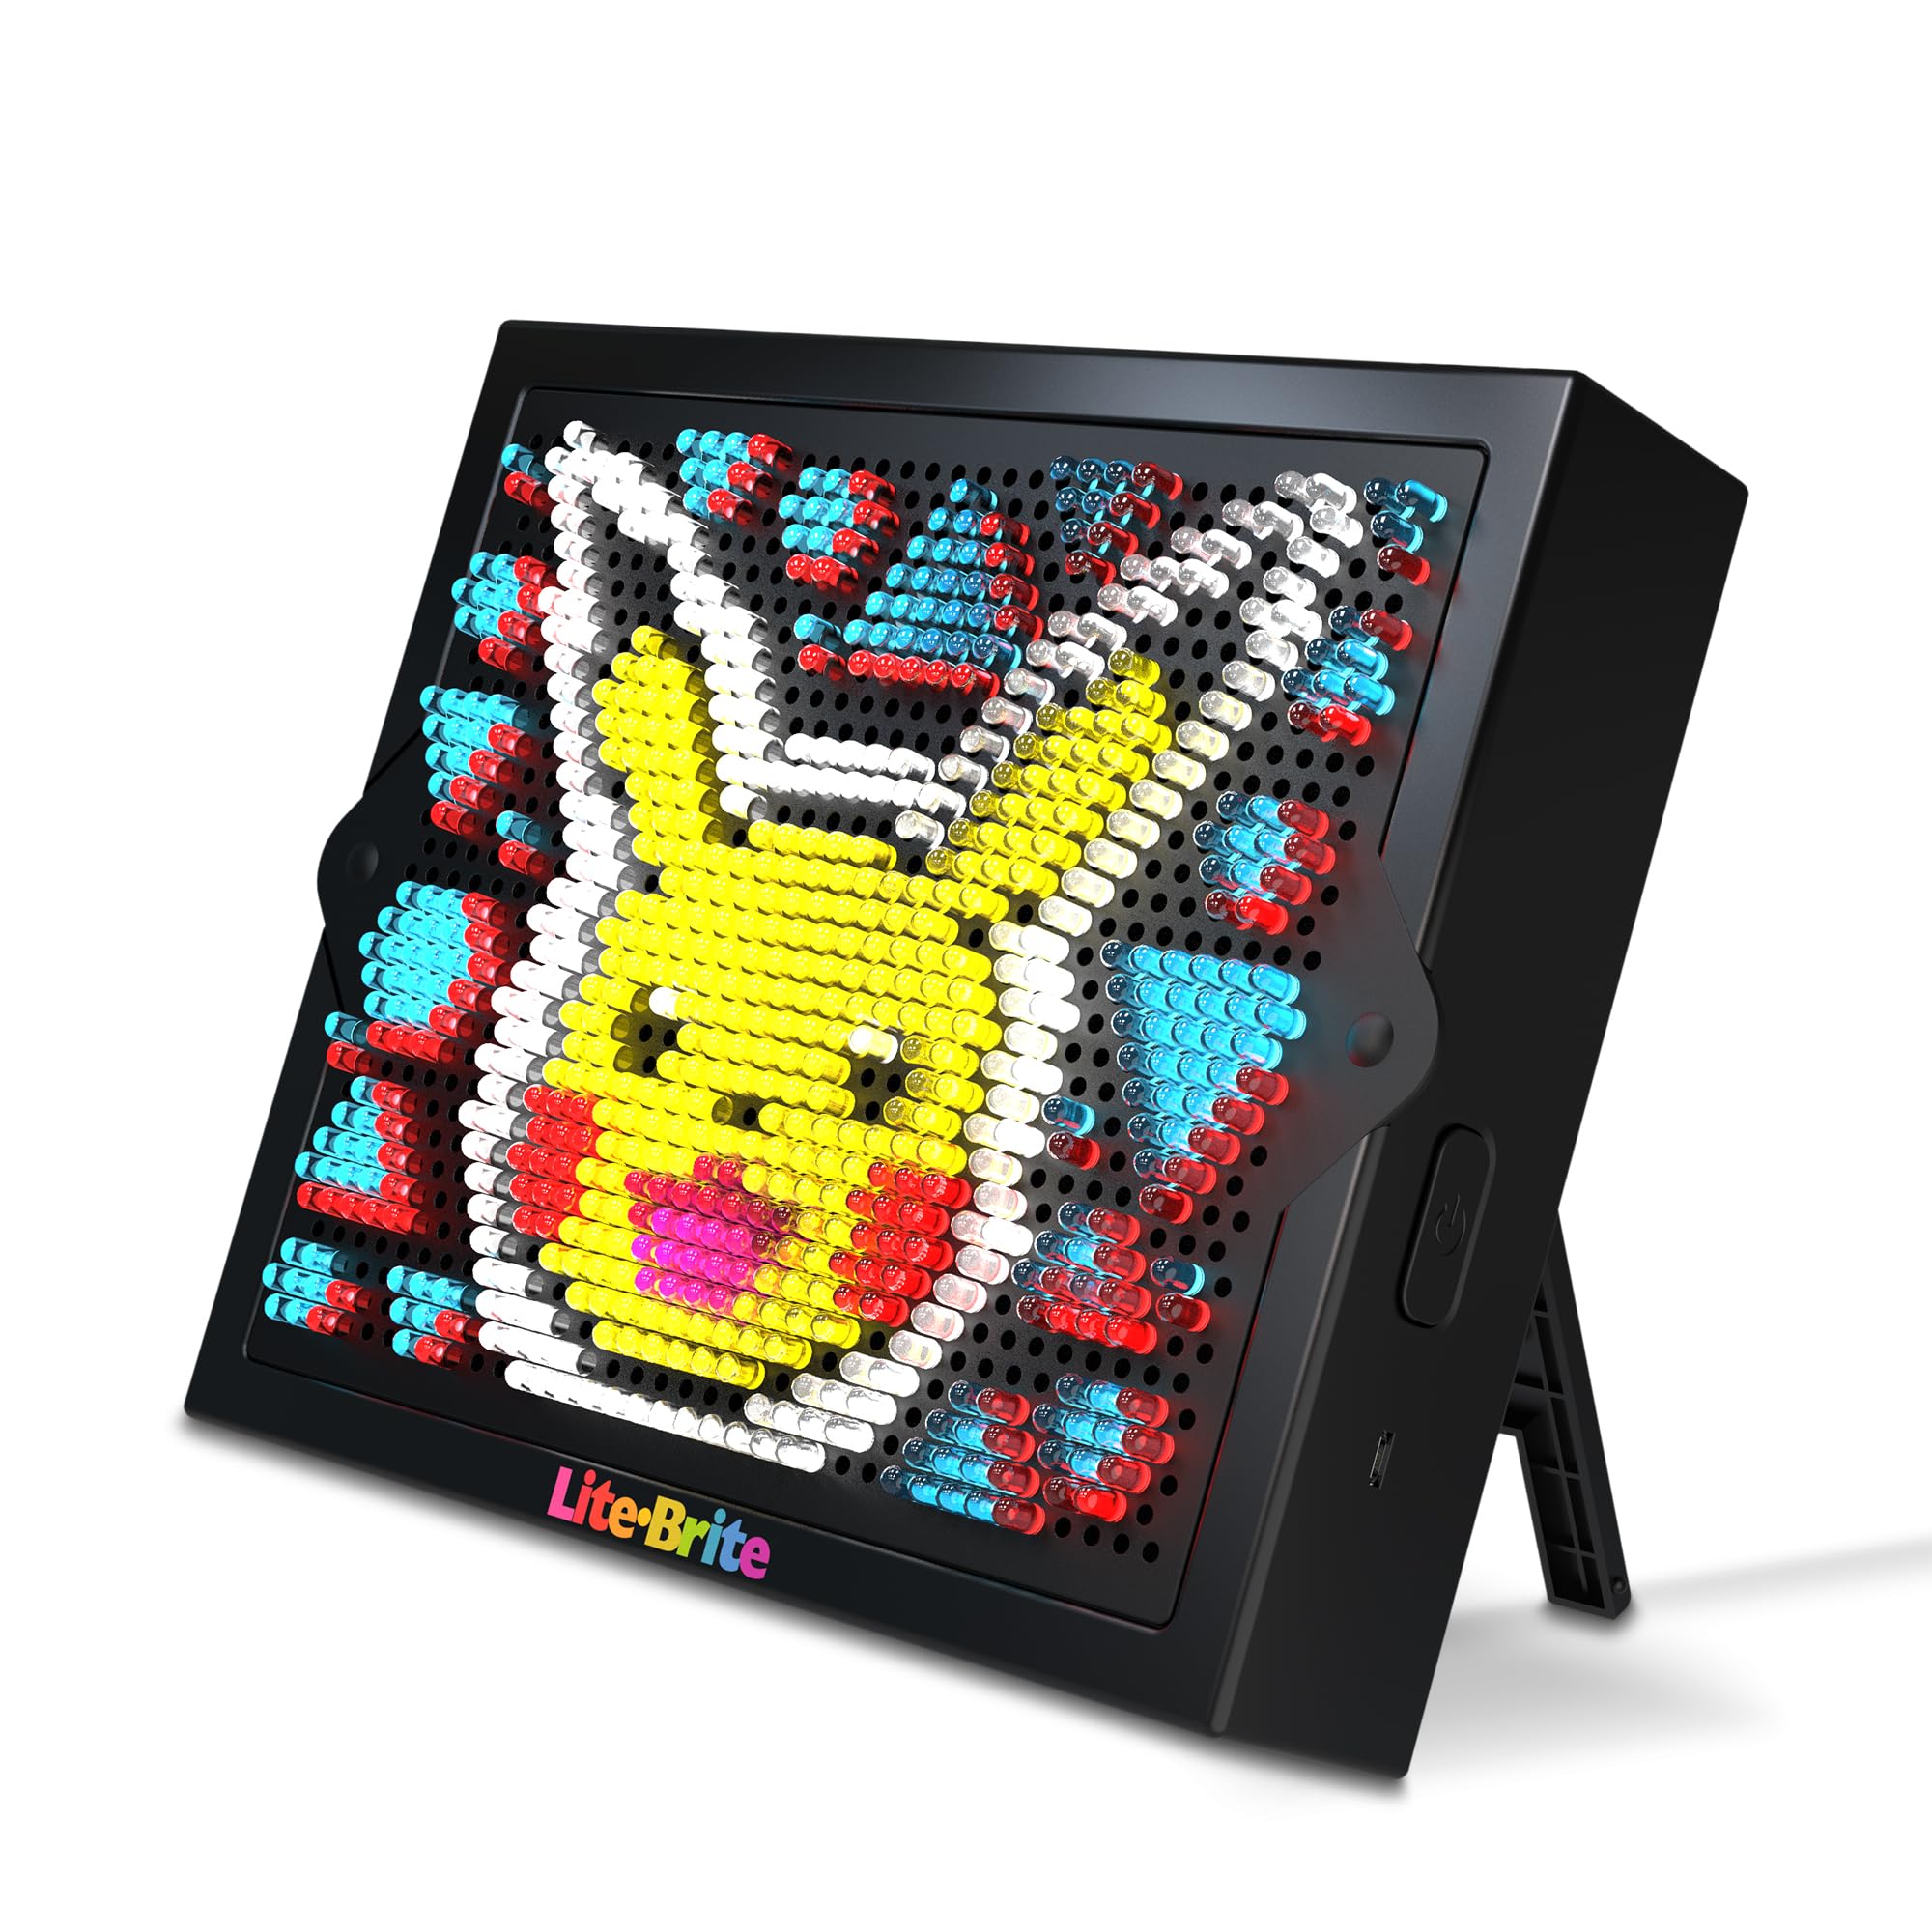 Lite-Brite Super Bright HD, Pokemon Edition - Create Art with Light, Enhances Creativity, Gift for Boys and Girls Ages 6+